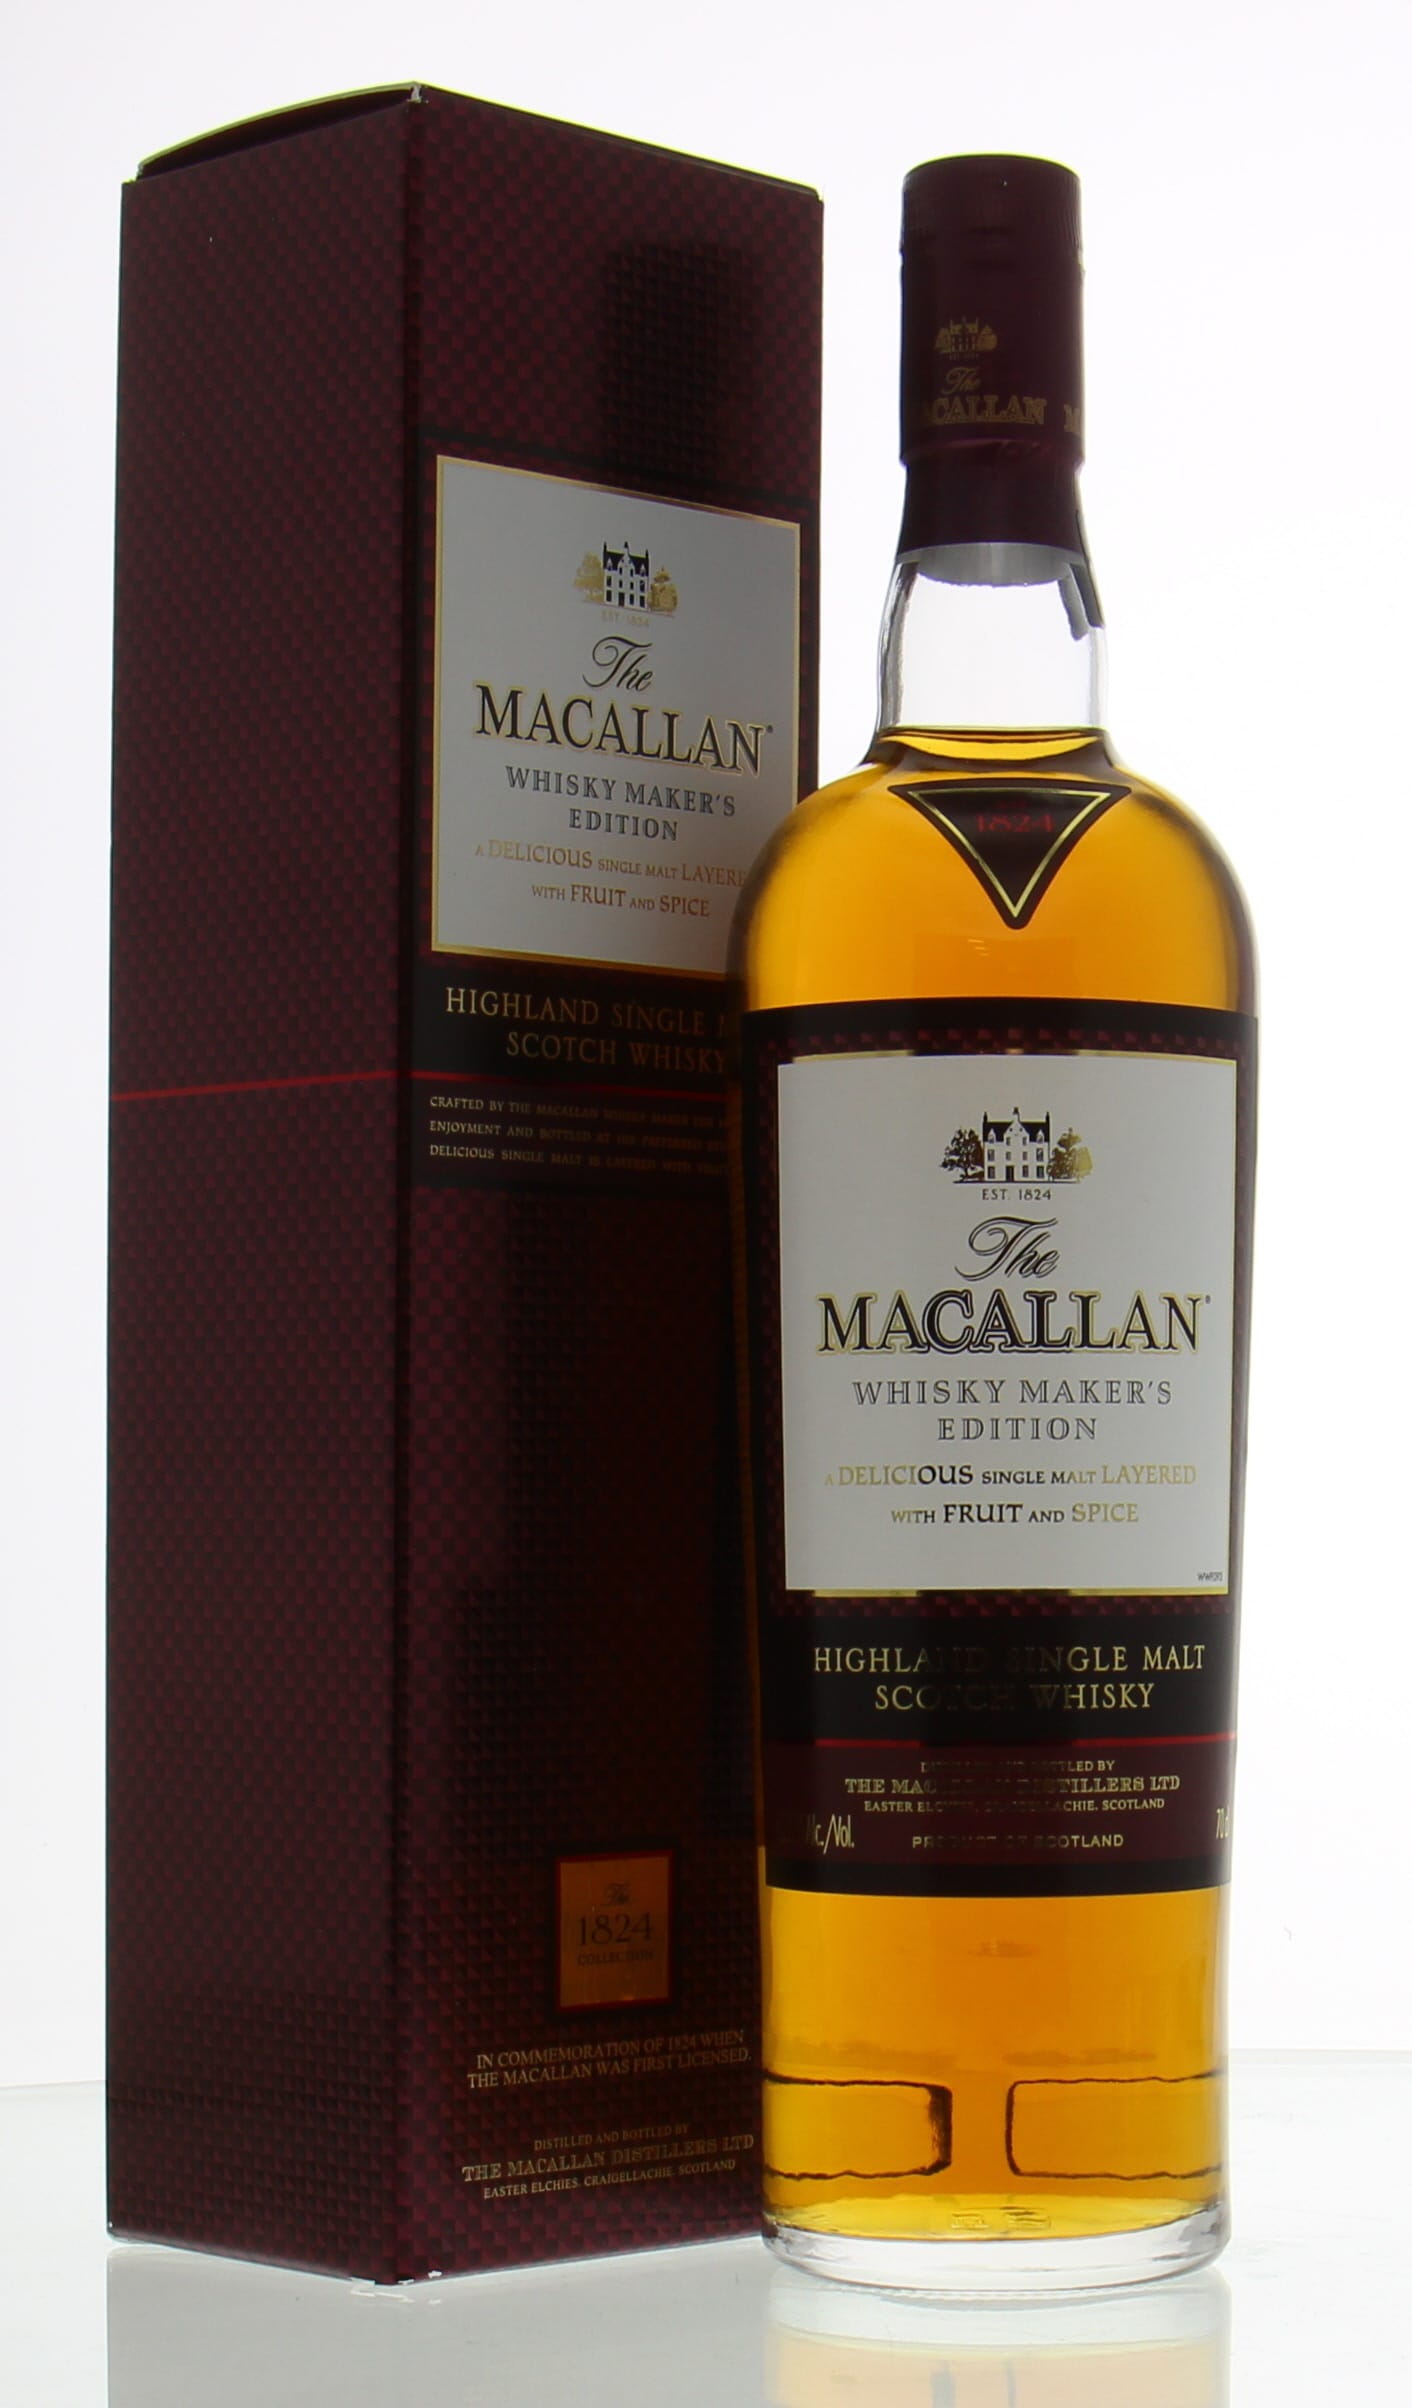 Macallan - Whisky Maker's Edition The 1824 Collection 42.8% NV